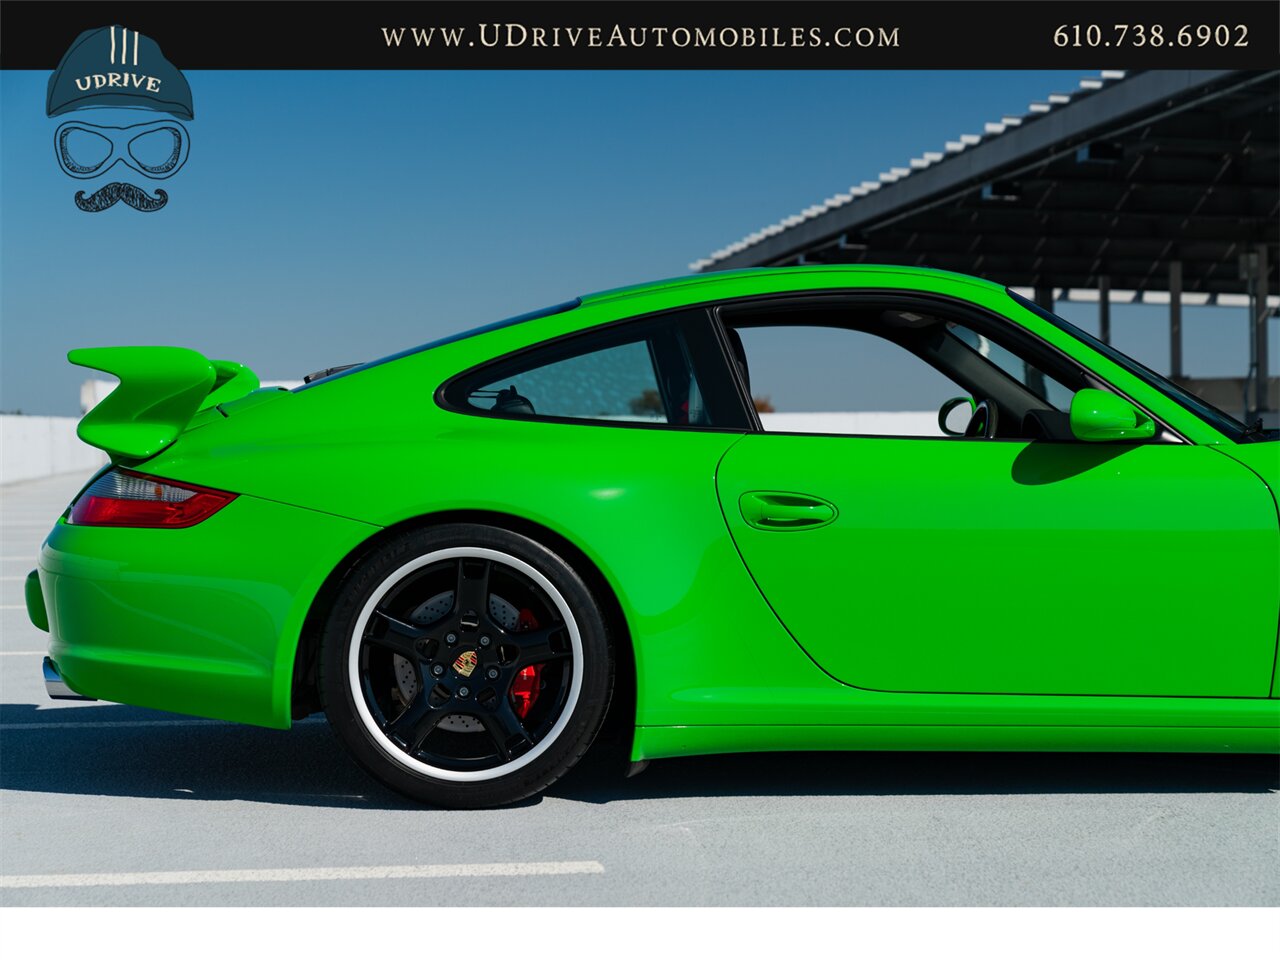 2006 Porsche 911 Carrera 4S  997 PTS Signal Green 6Sp Sport Sts Spt Chrono Spt Exhst - Photo 19 - West Chester, PA 19382